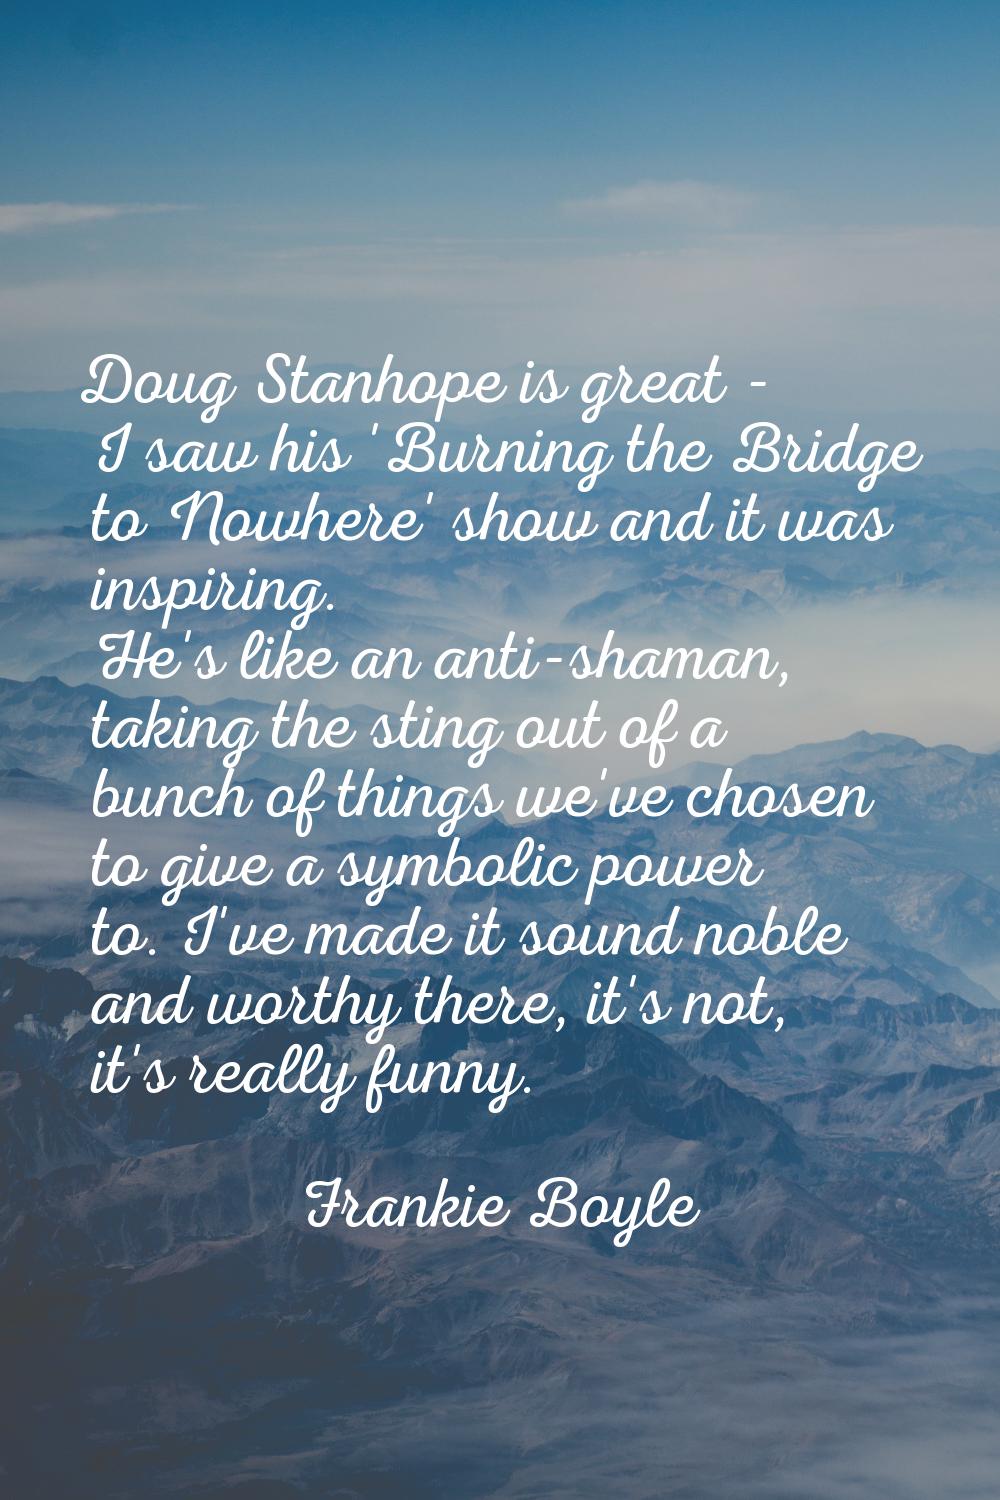 Doug Stanhope is great - I saw his 'Burning the Bridge to Nowhere' show and it was inspiring. He's 